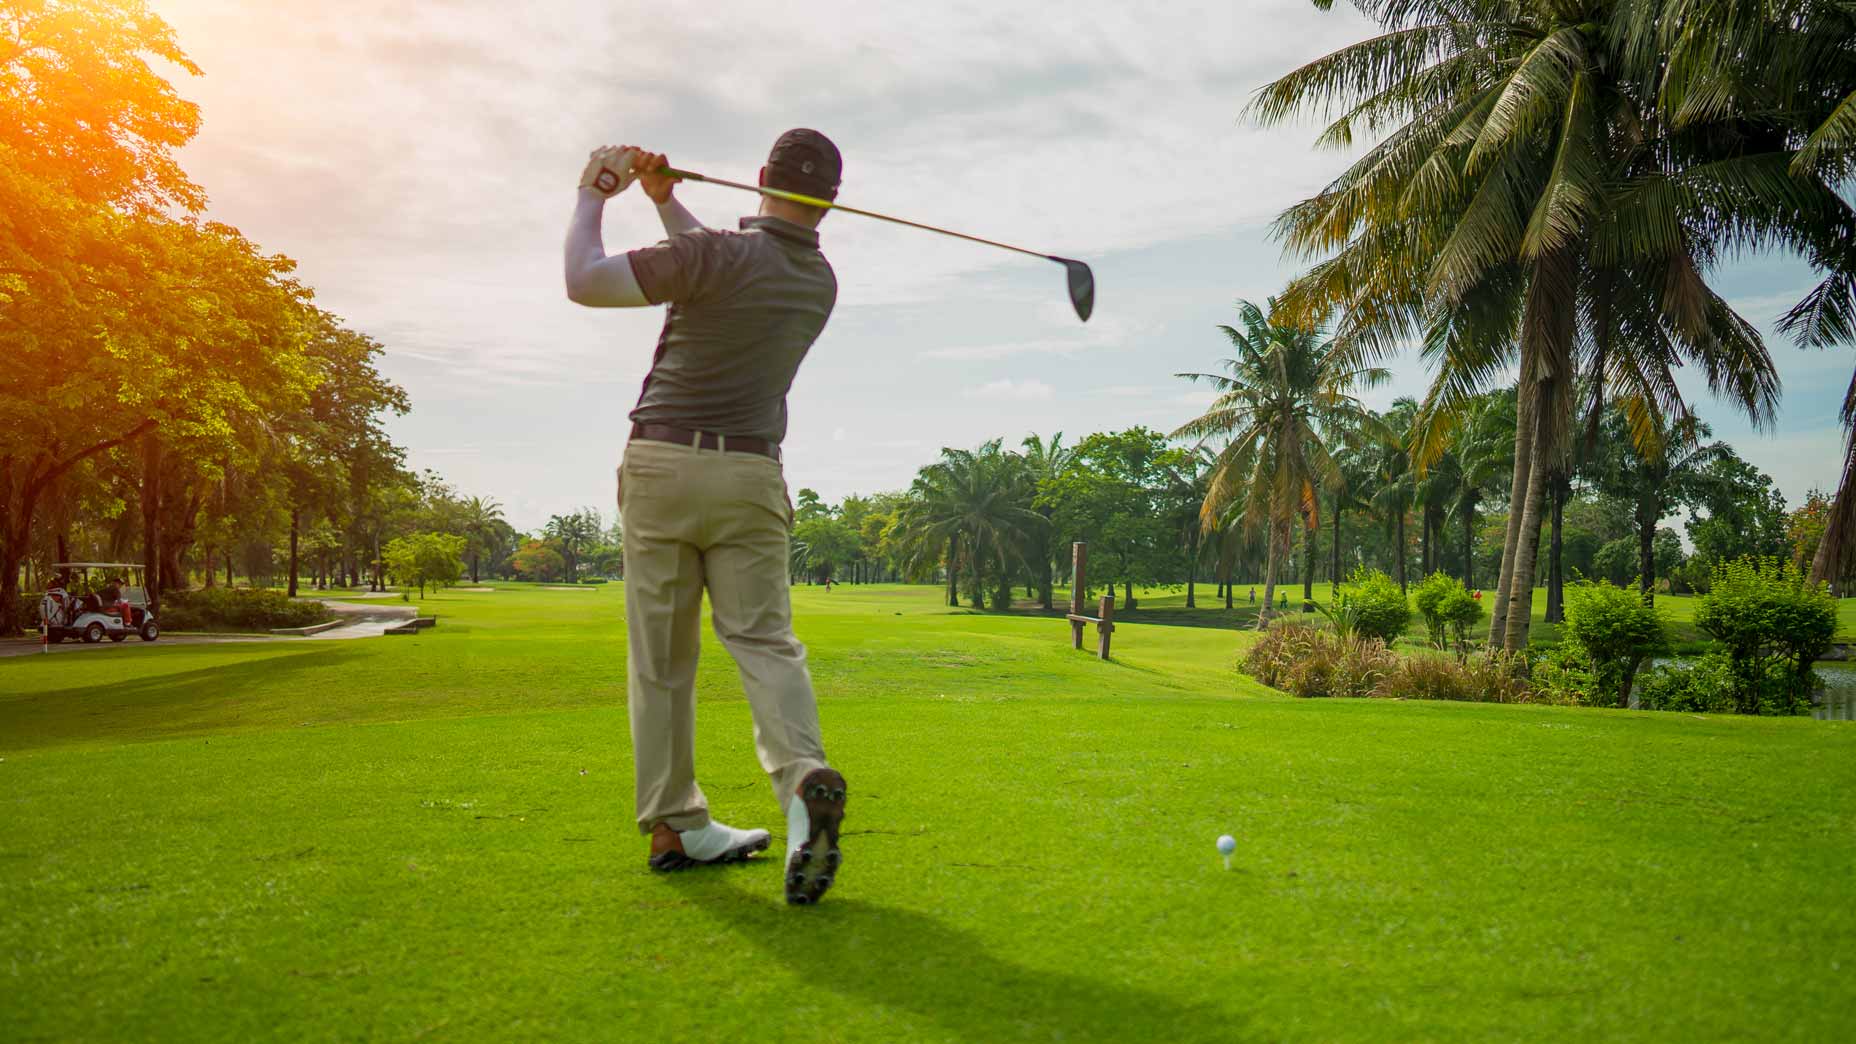 write a blog about The top 5 golf courses to play in the world